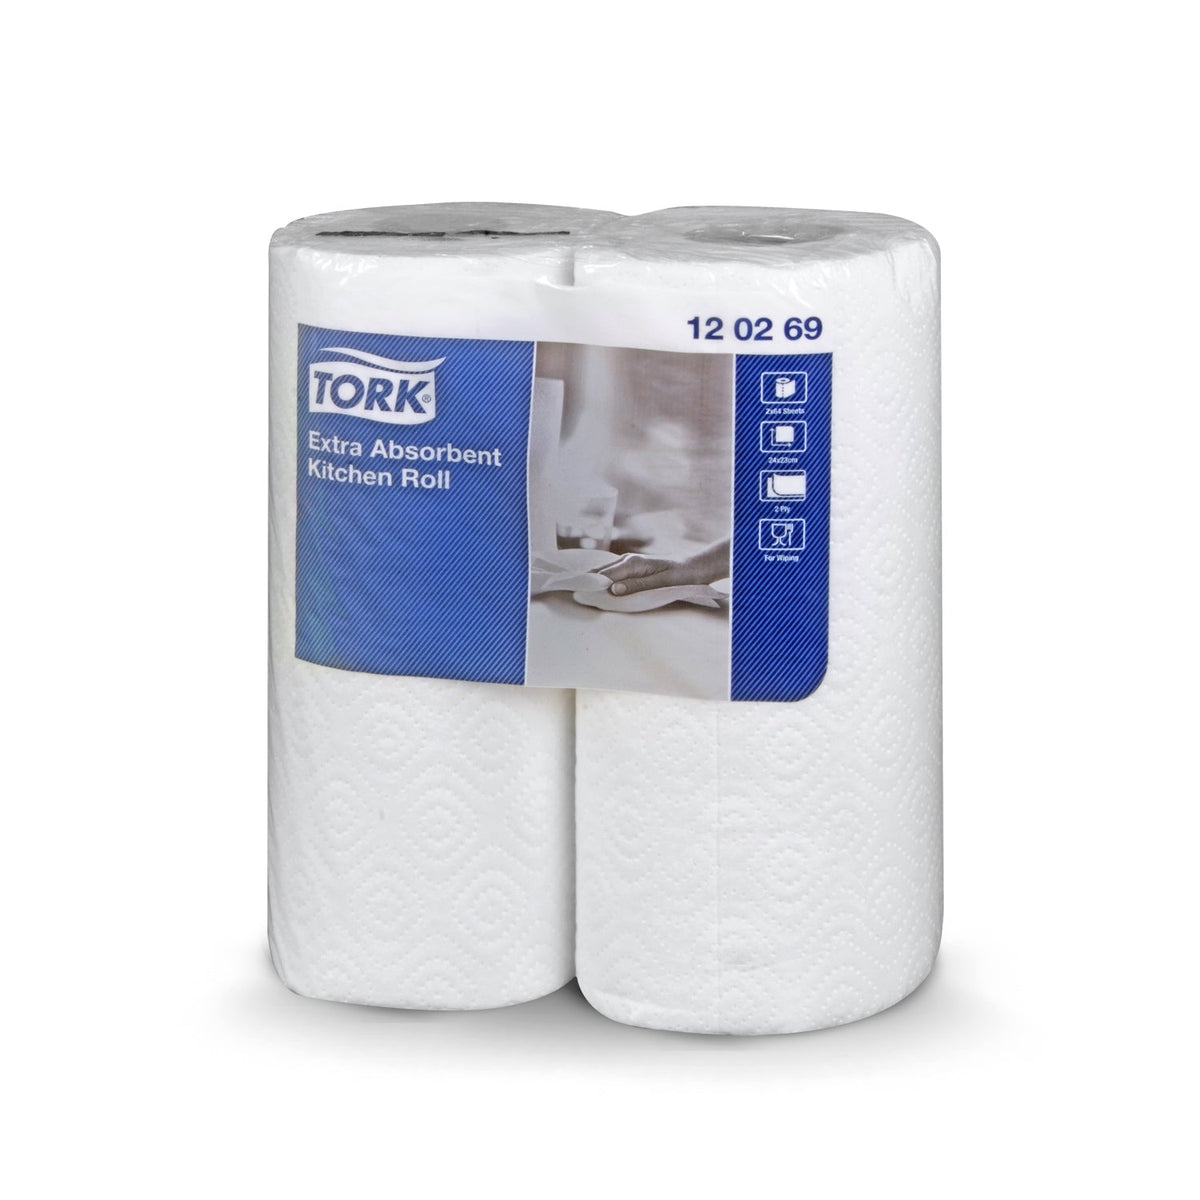 Tork® EXTRA ABSORBENT KITCHEN ROLL (SCA 120269)